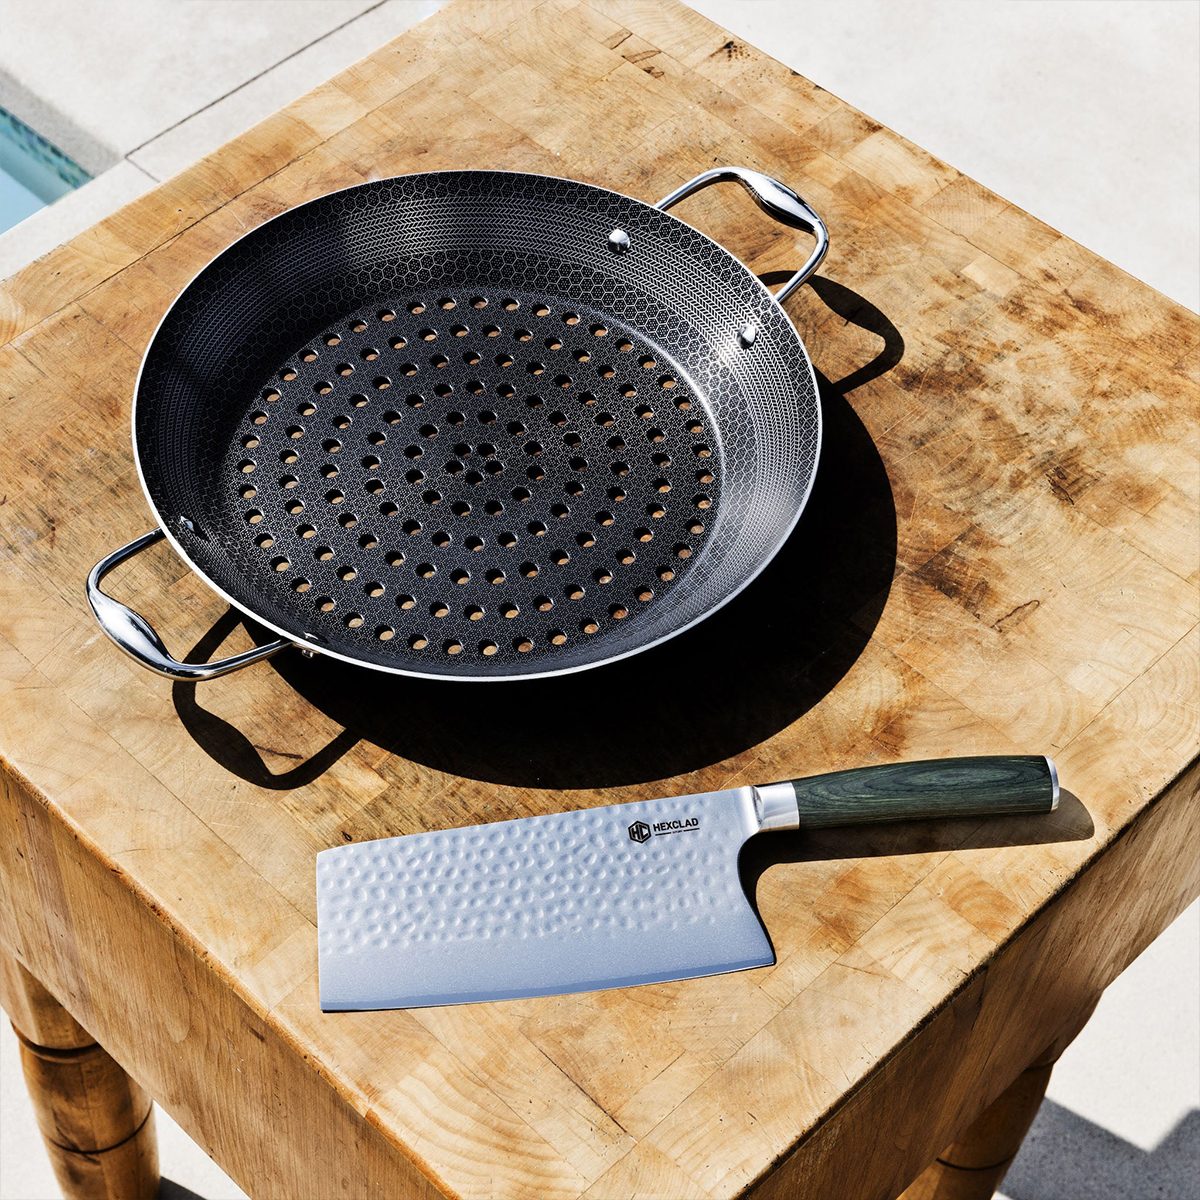 HexClad Fry Pan Review & Giveaway • Steamy Kitchen Recipes Giveaways